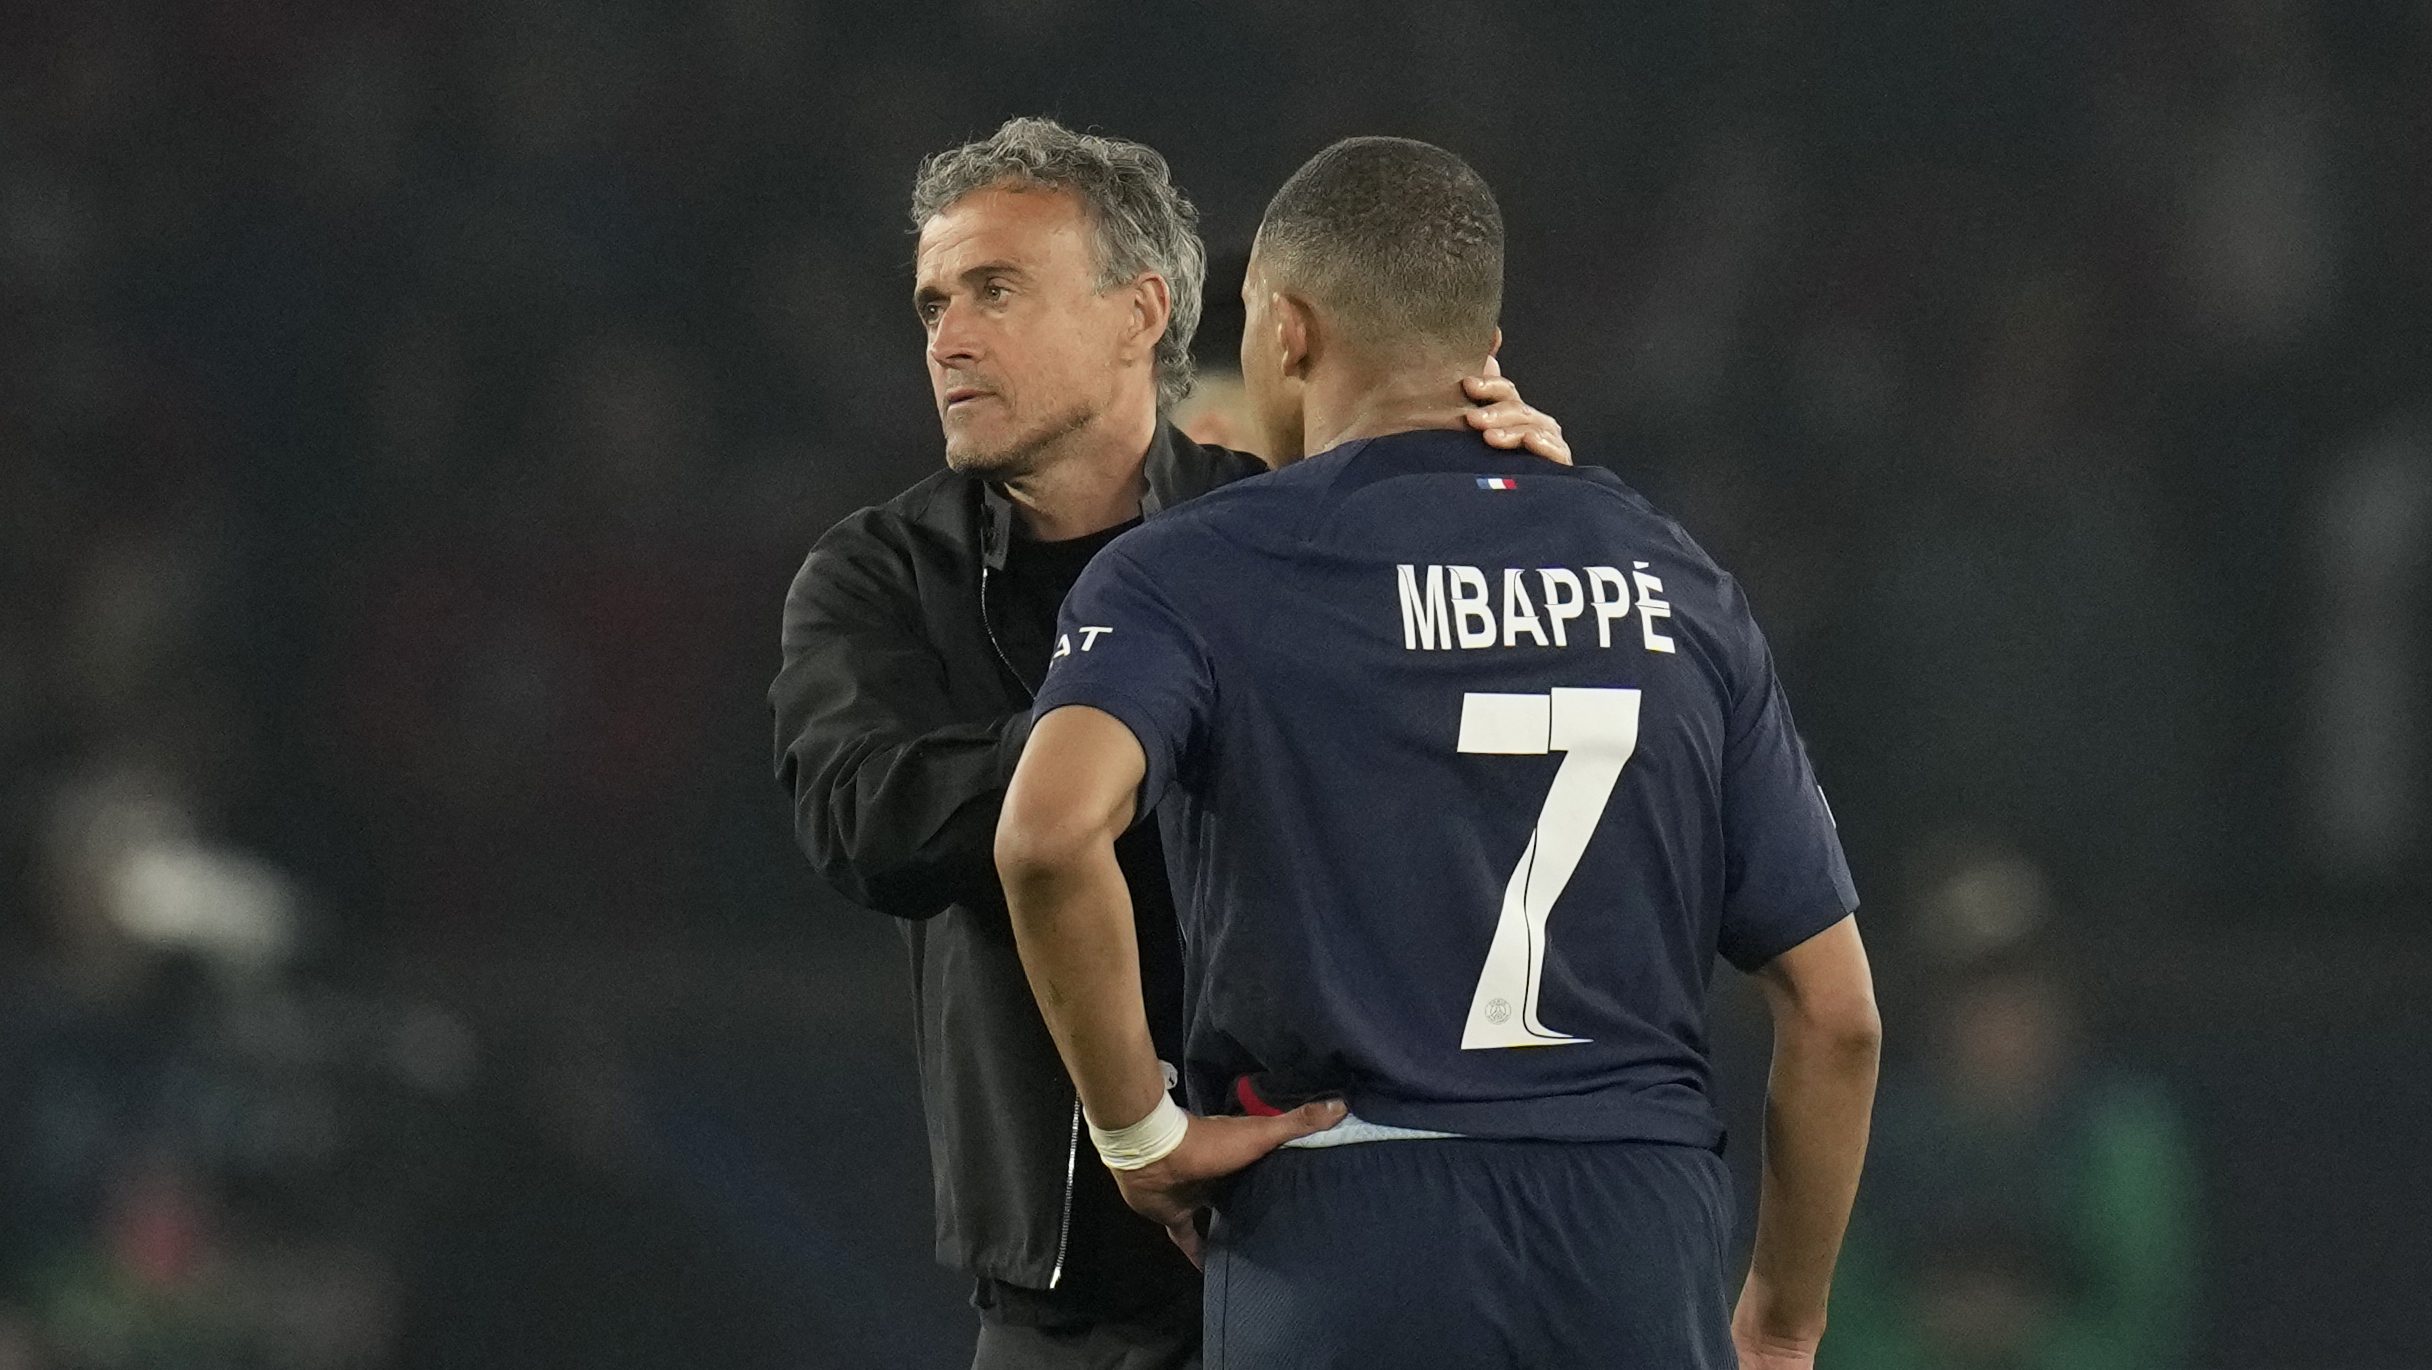 luis-enrique-talks-about-the-departure-of-kylian-mbappe:-“we-knew-it-for-a-long-time”